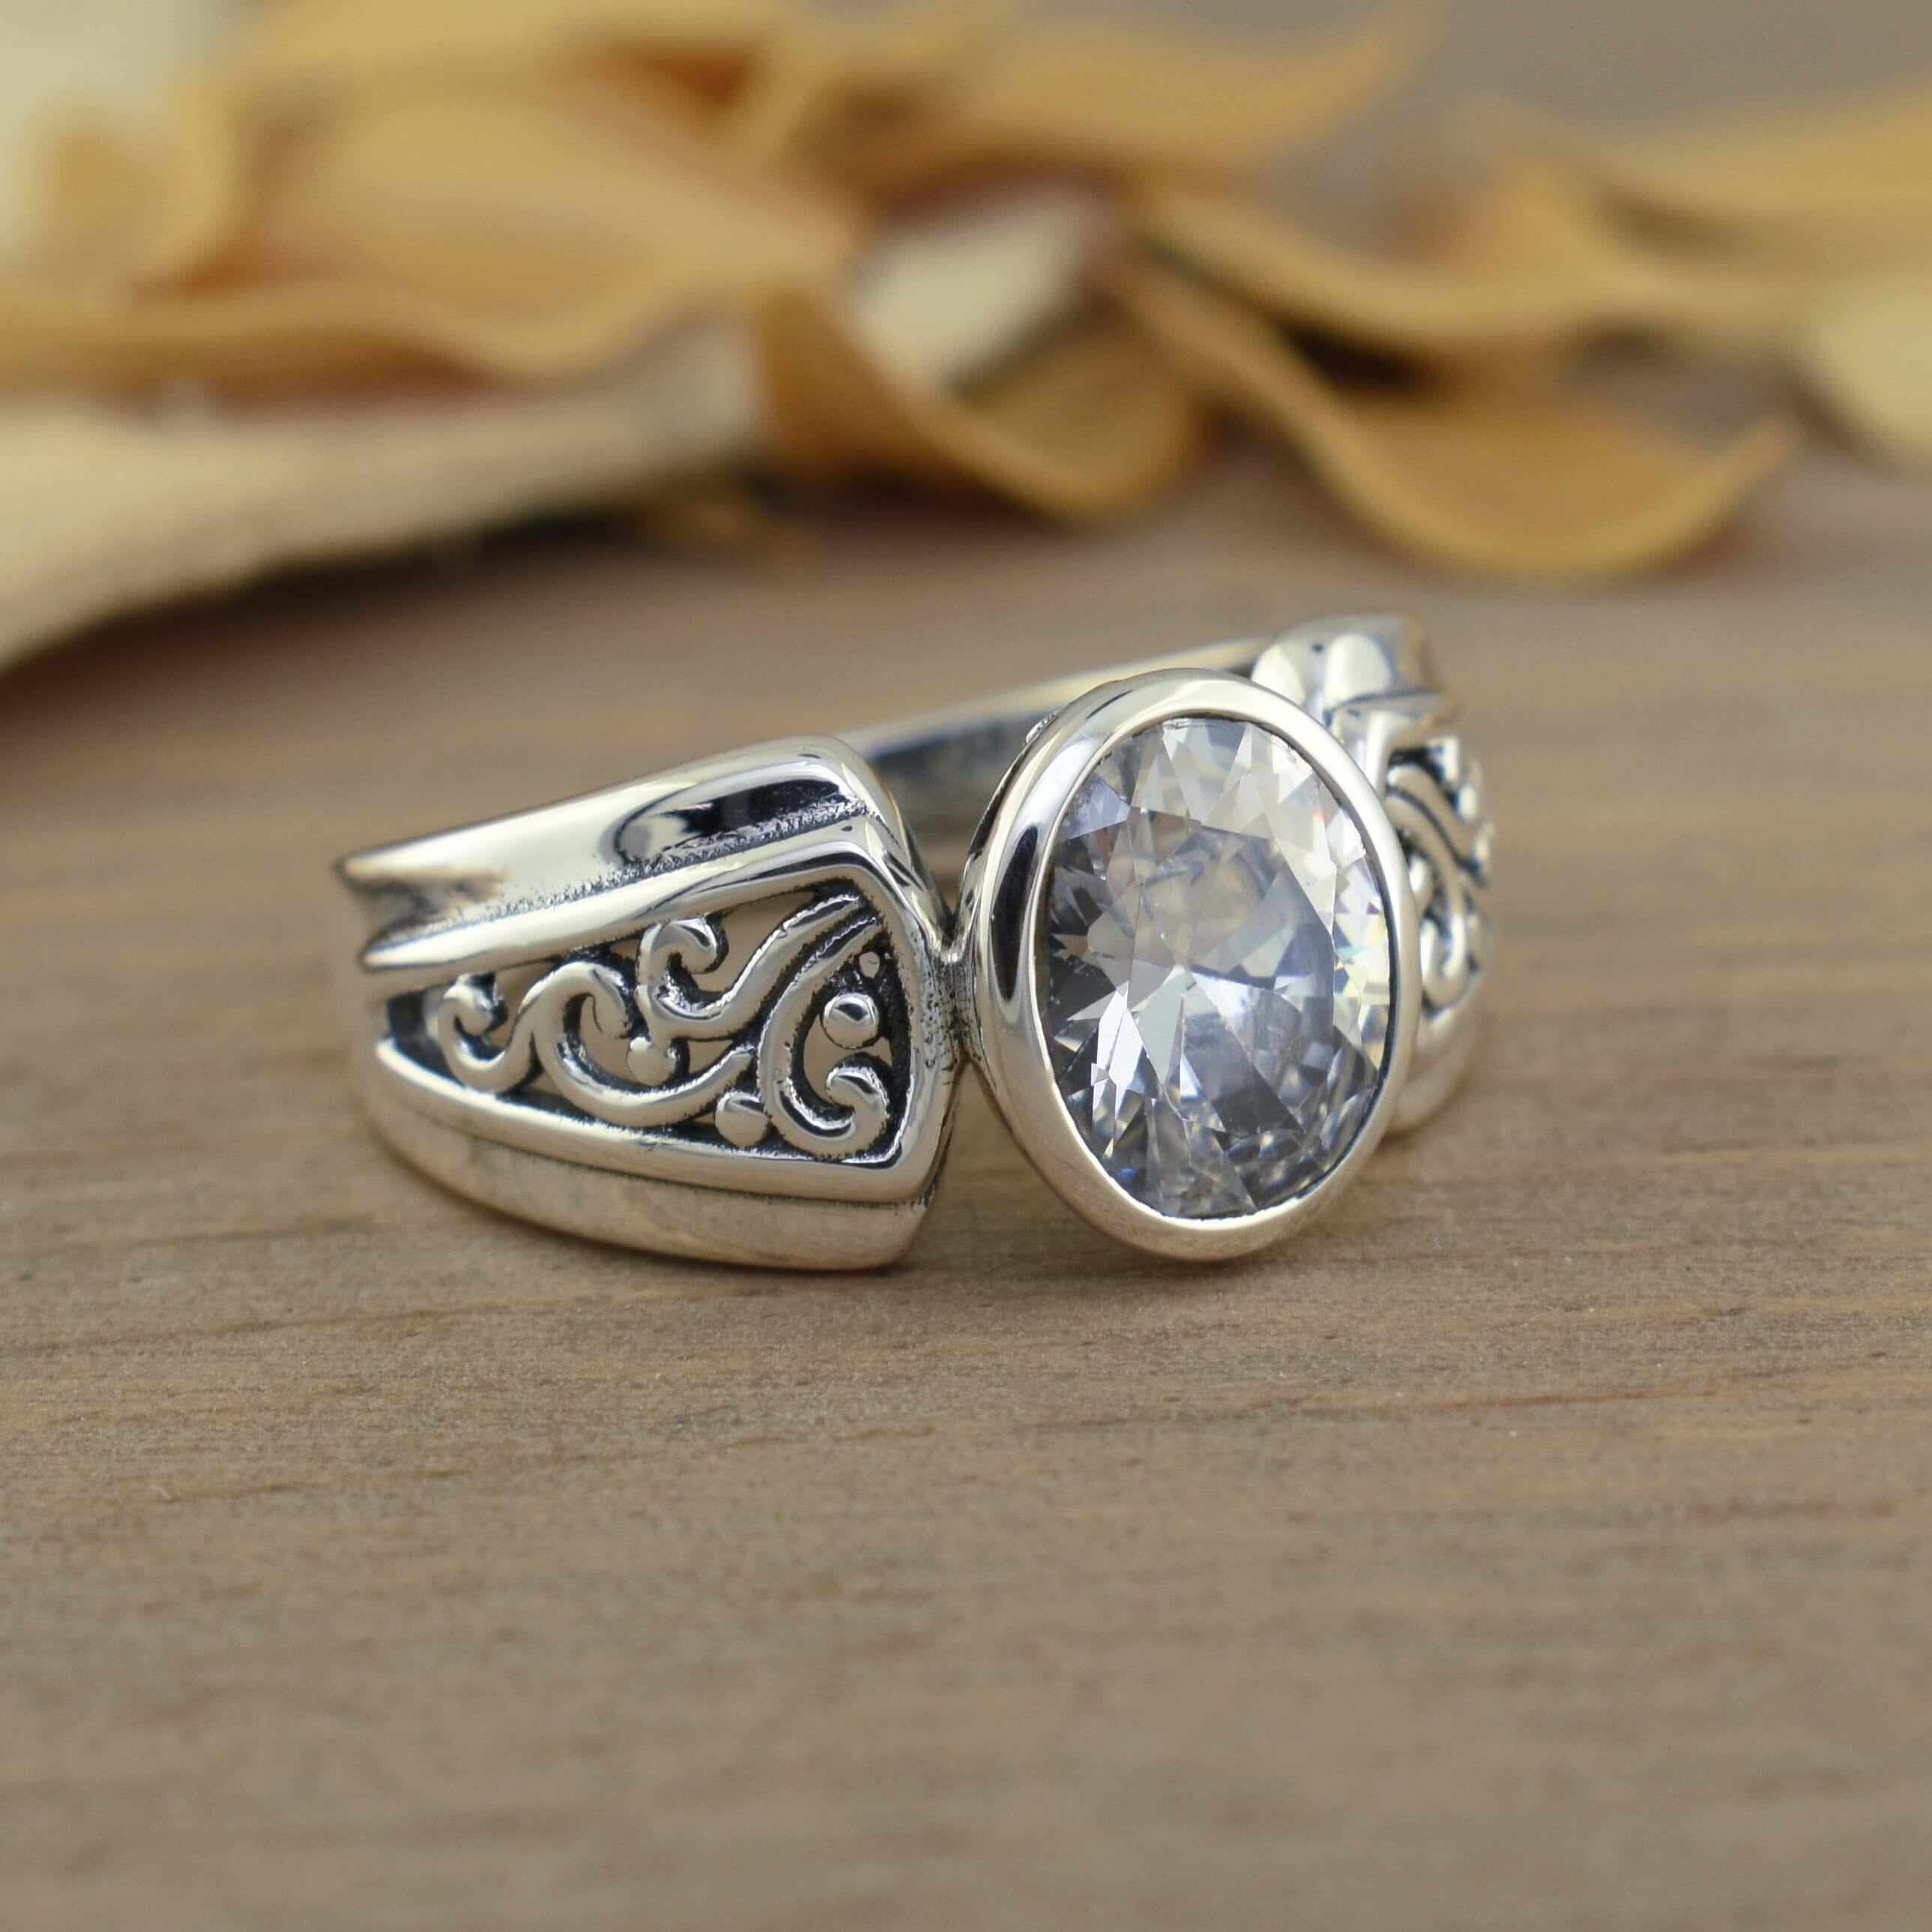 Ring with cutout filigree and oval stone in sterling silver